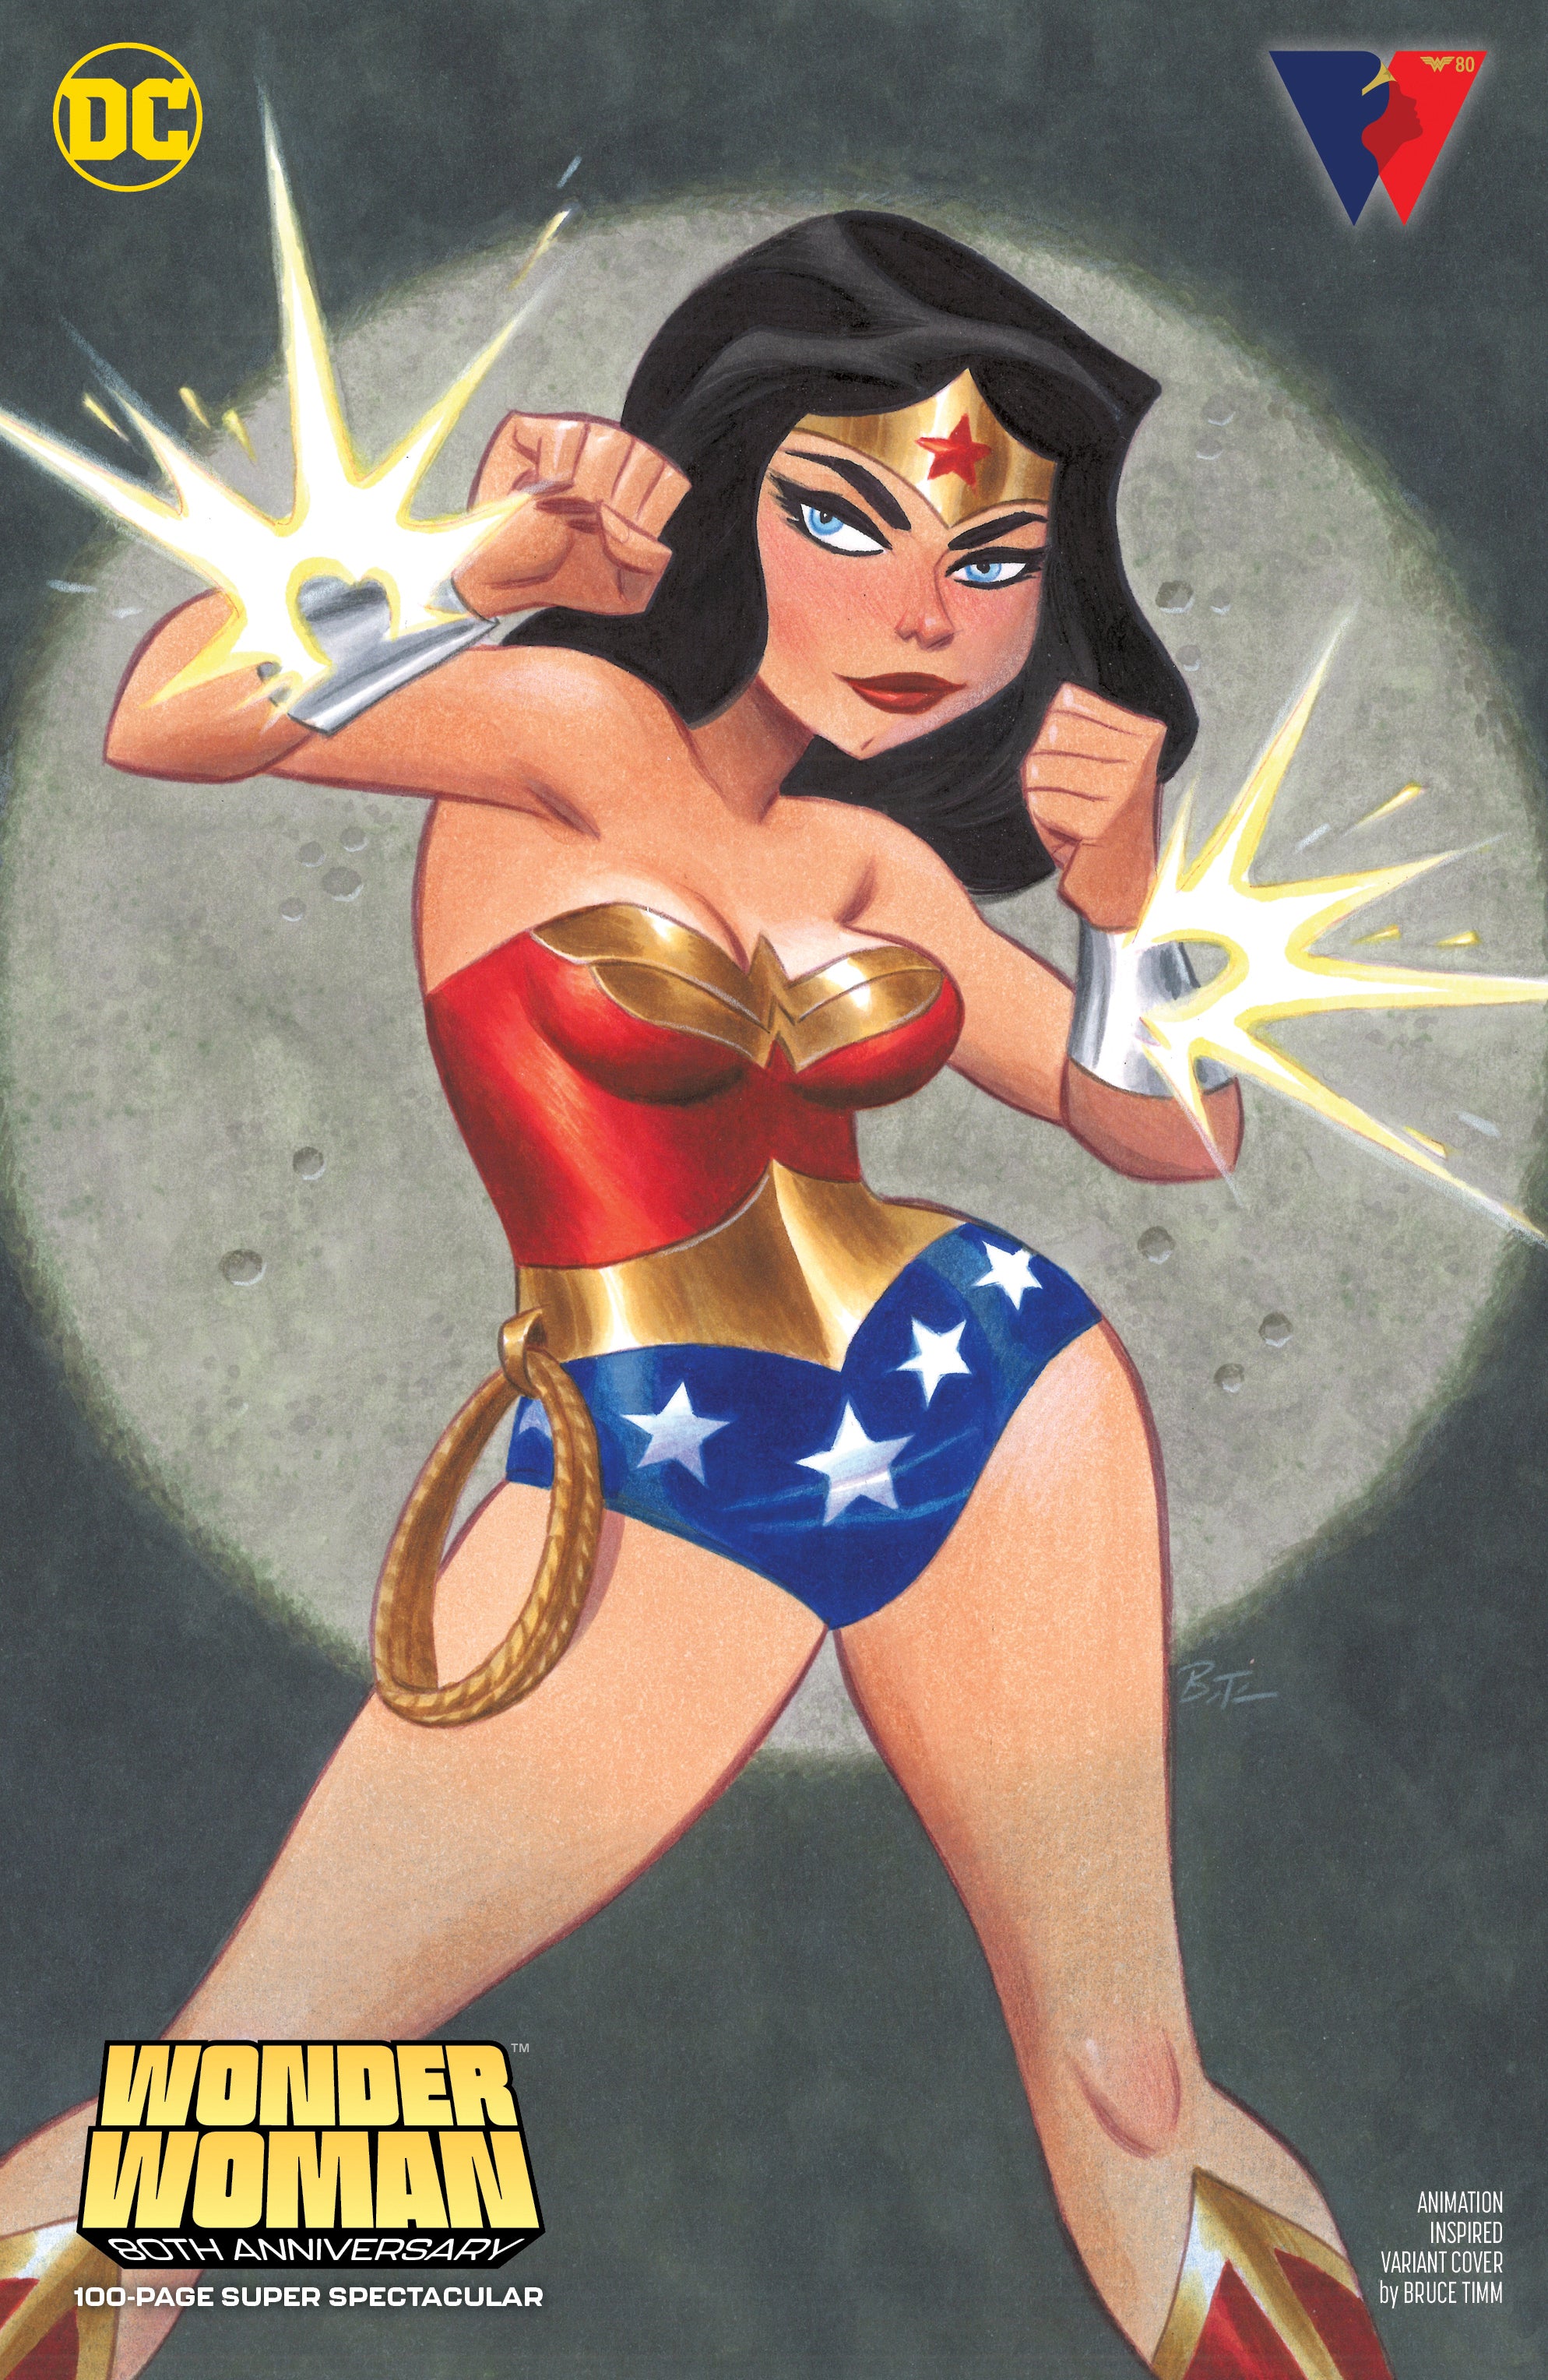 WONDER WOMAN 80TH ANNIVERSARY 100-PAGE SUPER SPECTACULAR #1 (ONE SHOT) CVR D BRUCE TIMM ANIMATION IN